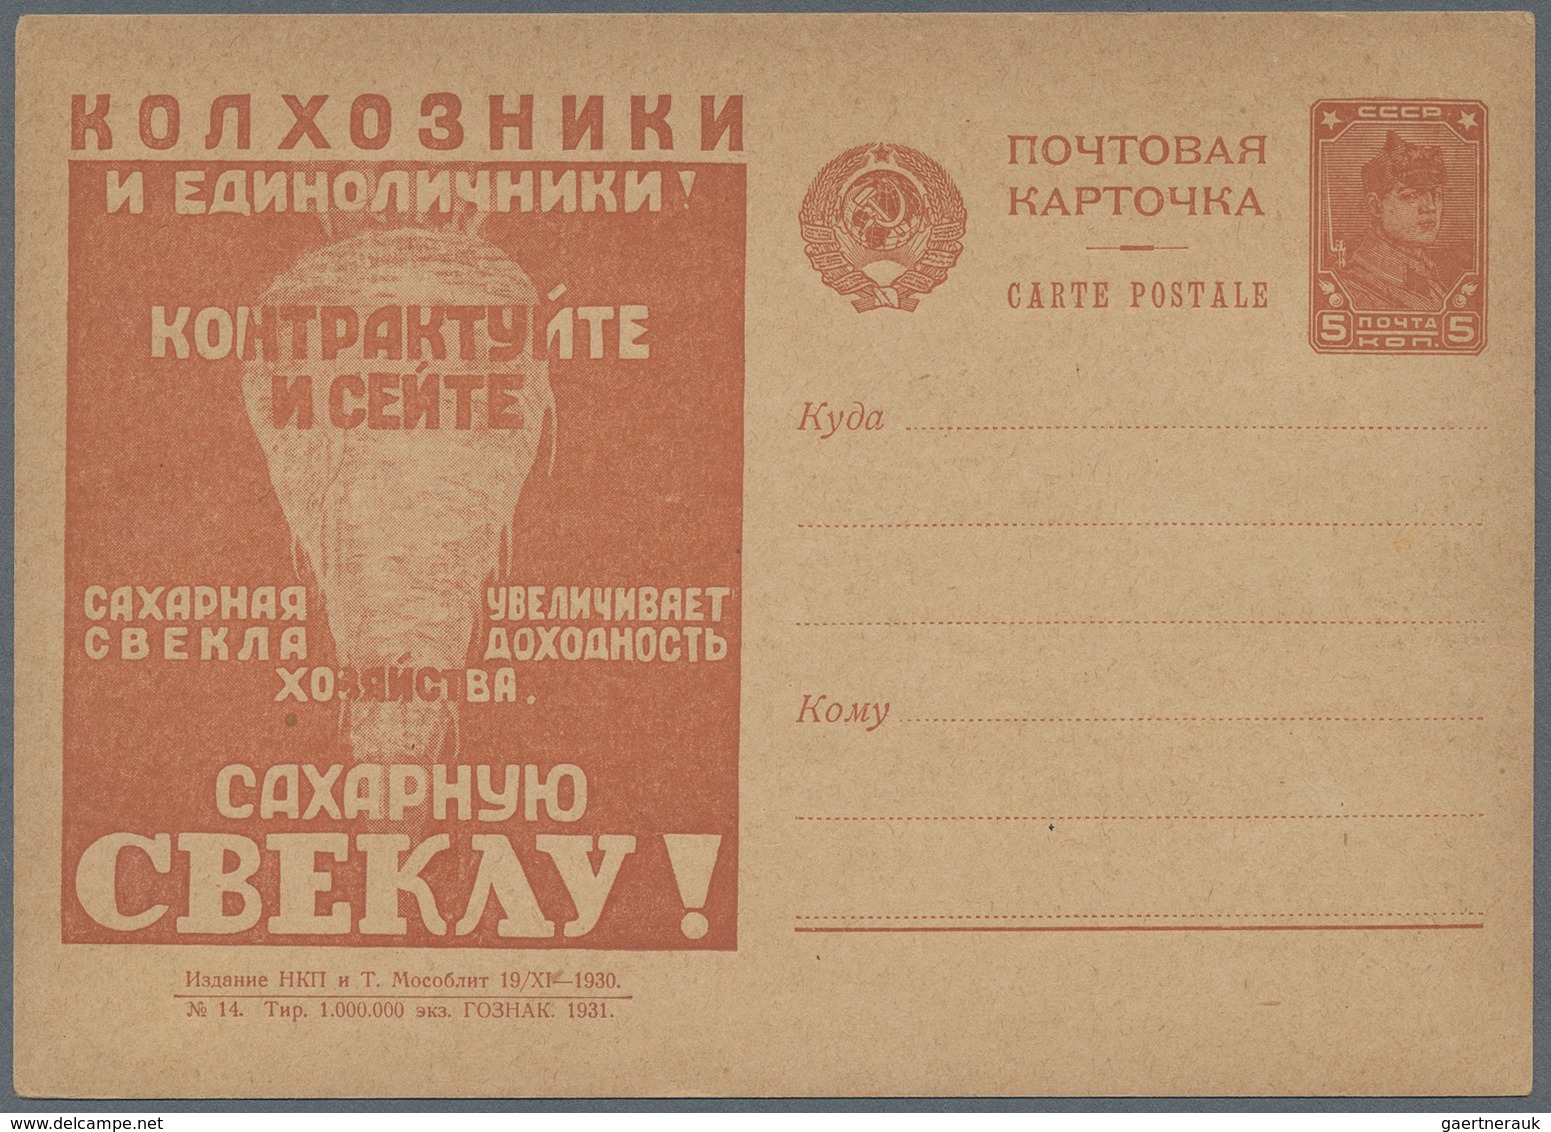 Sowjetunion - Ganzsachen: 1929/32 ca. 17 unused and used pictured propaganda postal stationery cards